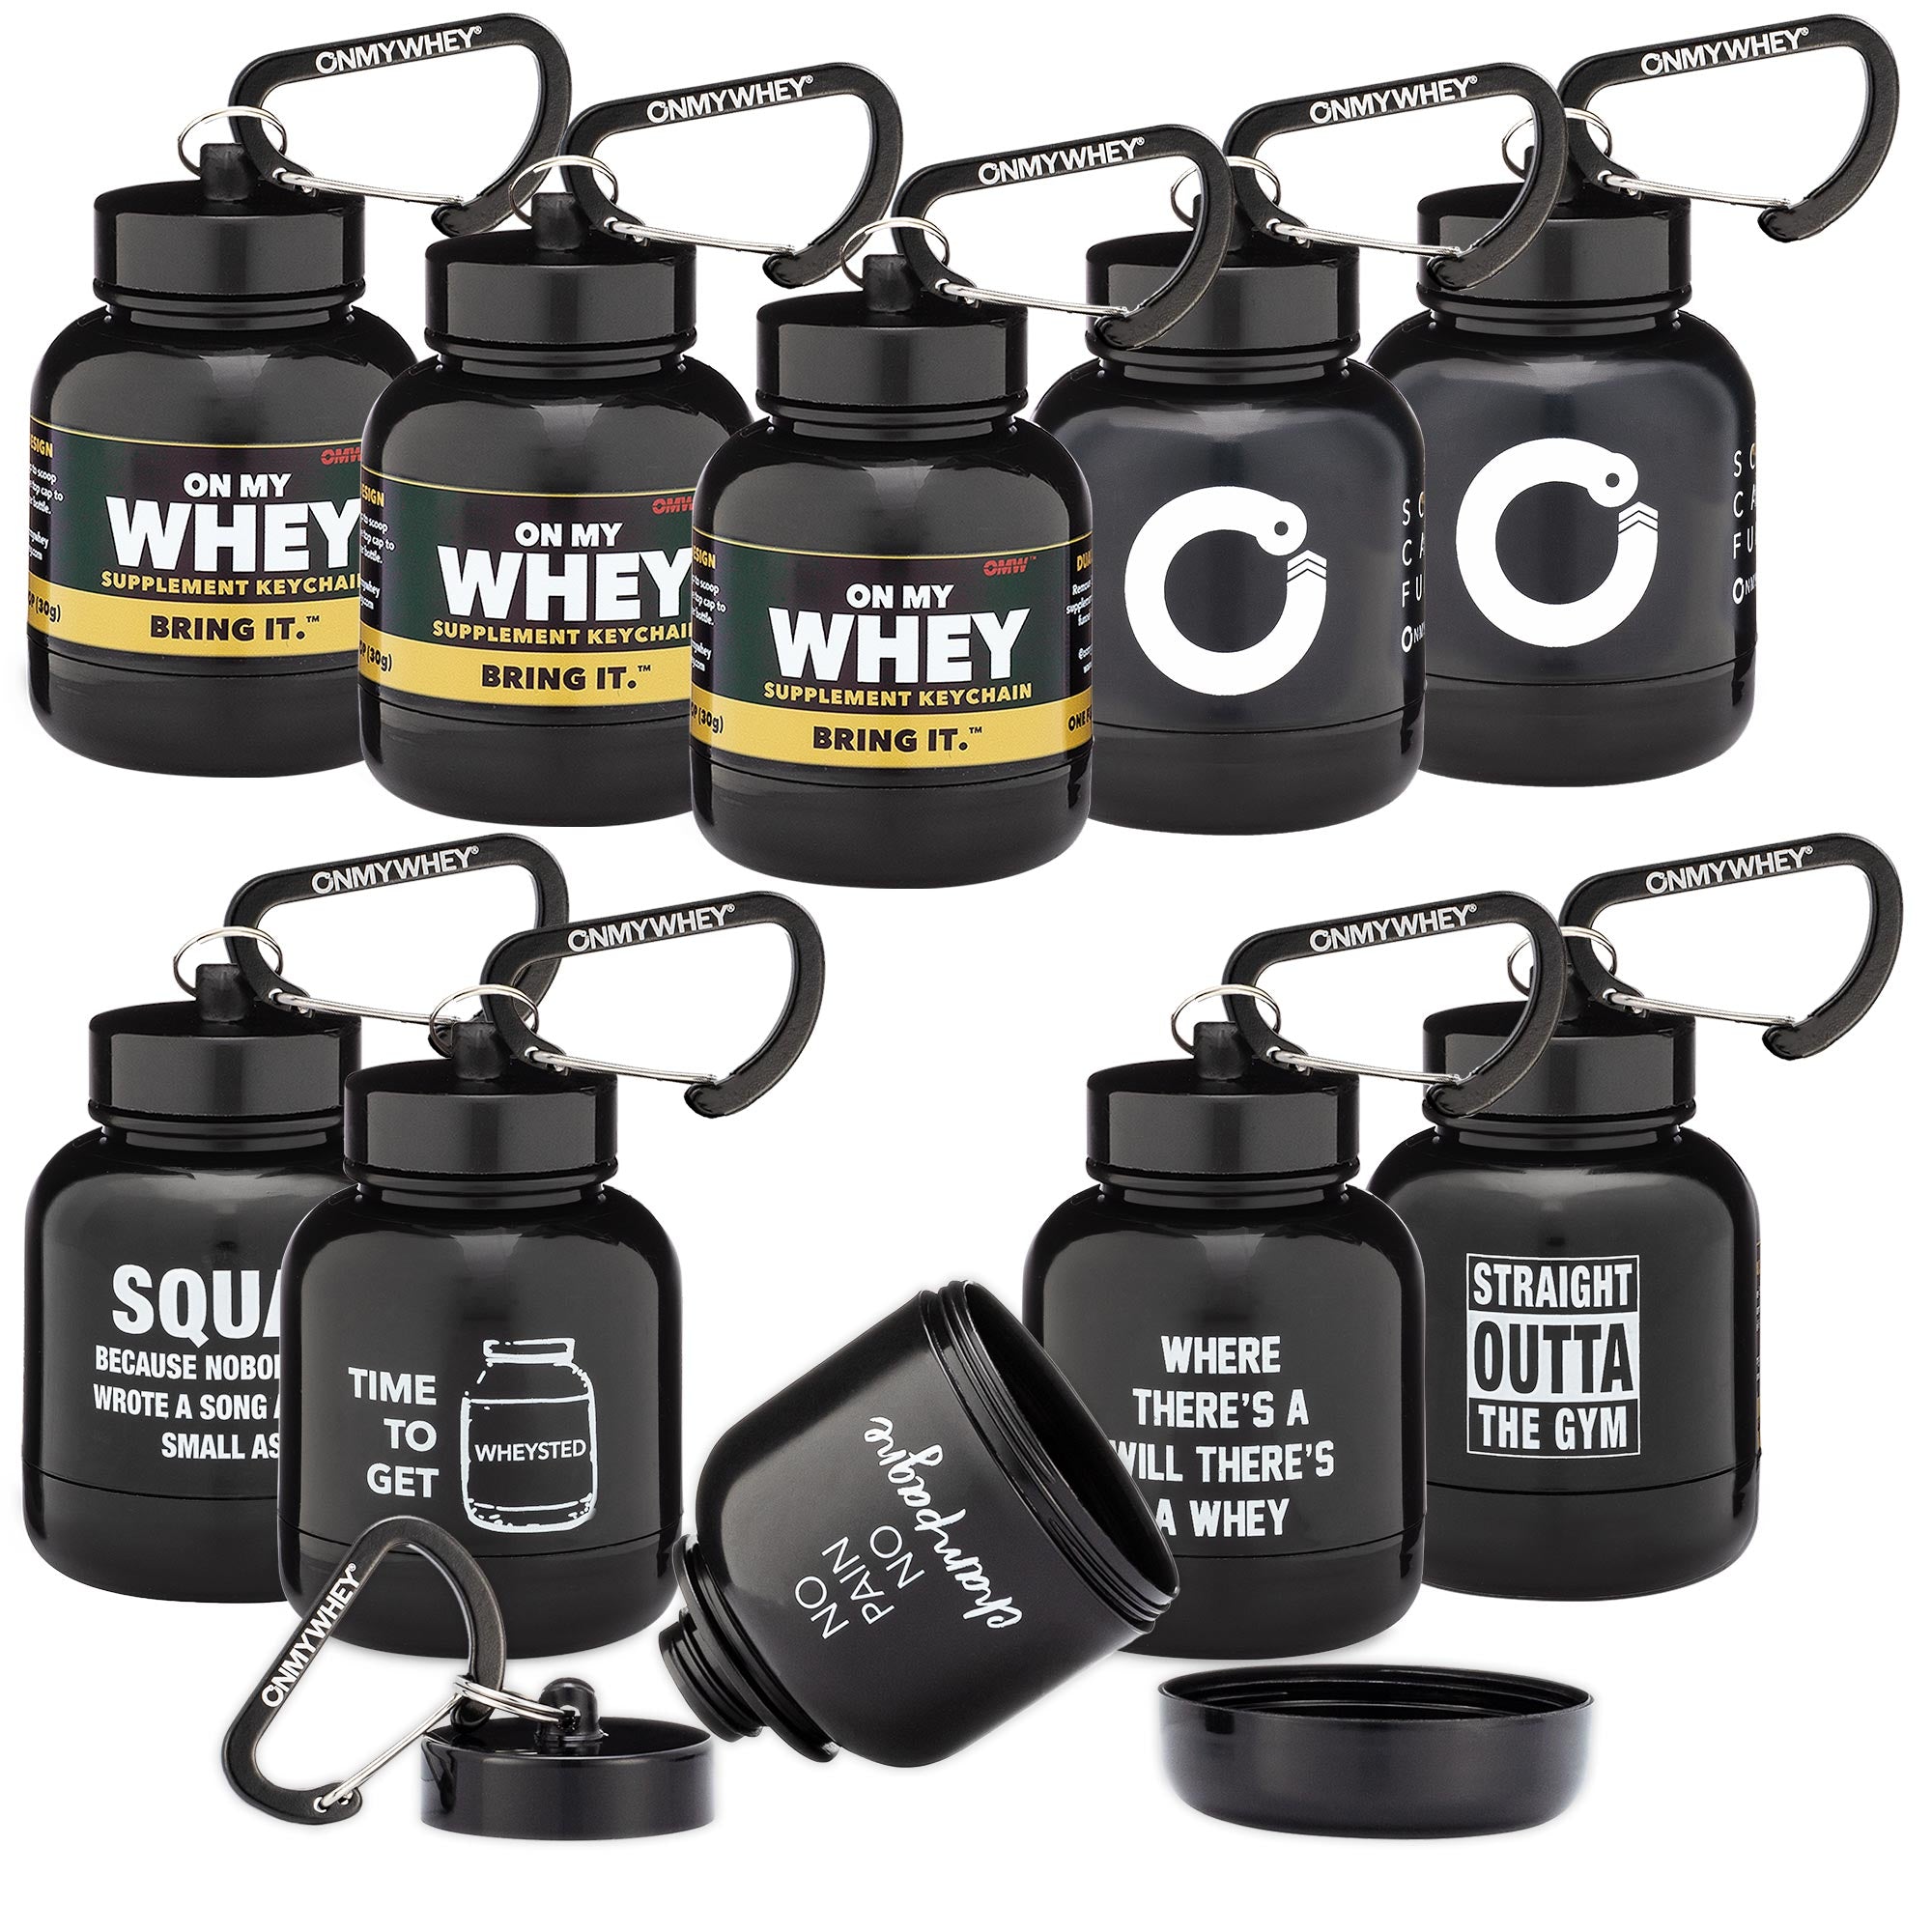 OnMyWhey - Protein Powder and Supplement Funnel Keychain, Portable to-Go  Container for The Gym, Workouts, Fitness, and Travel - TSA Approved, Punny  Variety 3-Pack